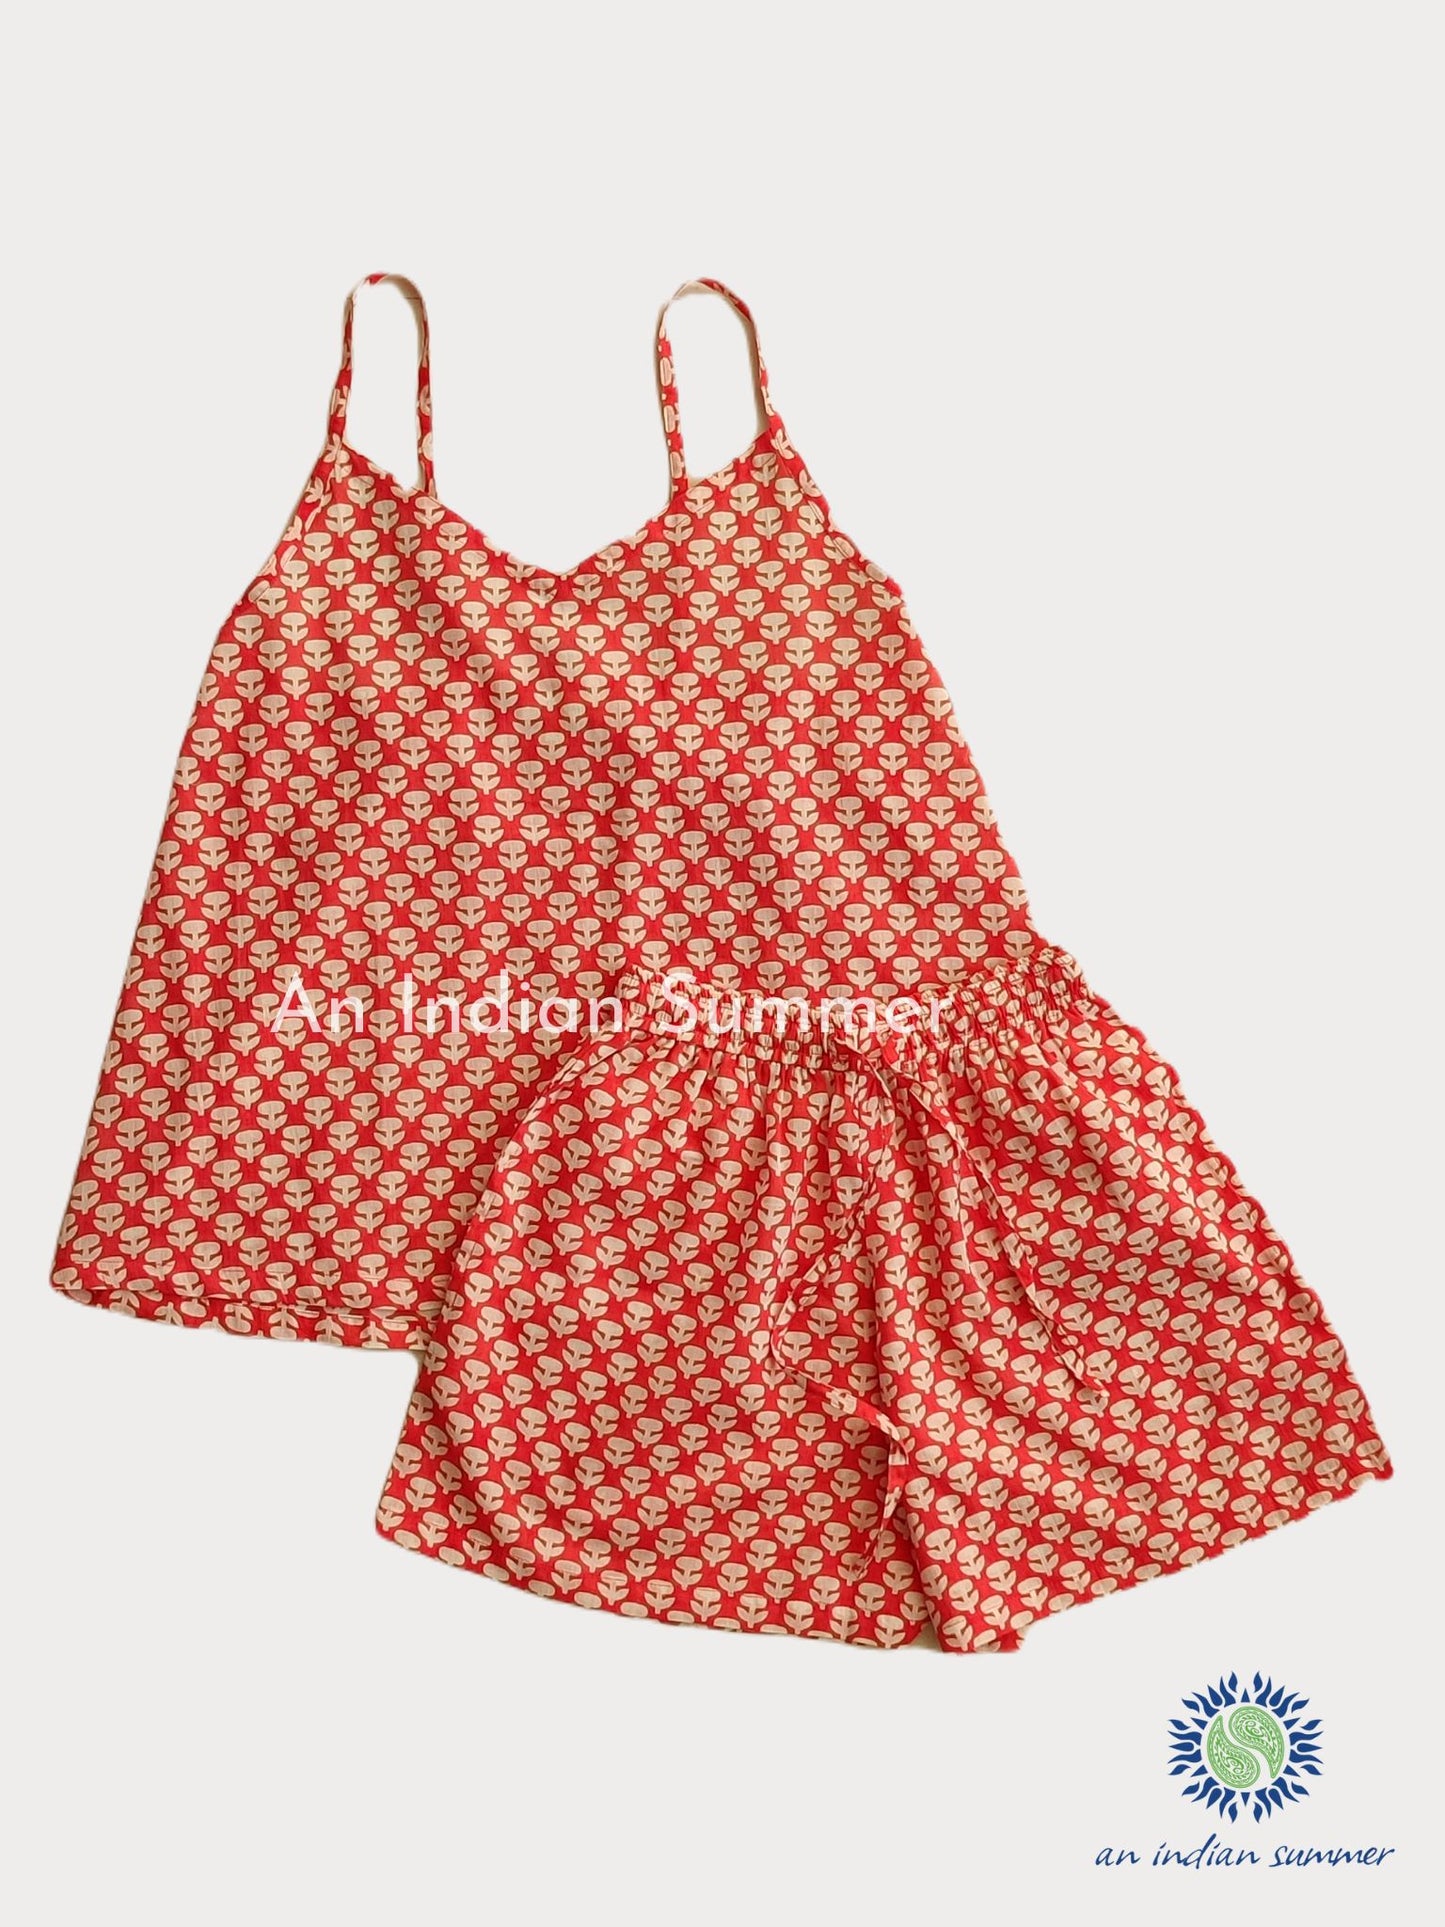 Coral | Daisy Cami Set | Hand Block Printed | Cotton Voile | An Indian Summer | Seasonless Timeless Sustainable Ethical Authentic Artisan Conscious Clothing Lifestyle Brand